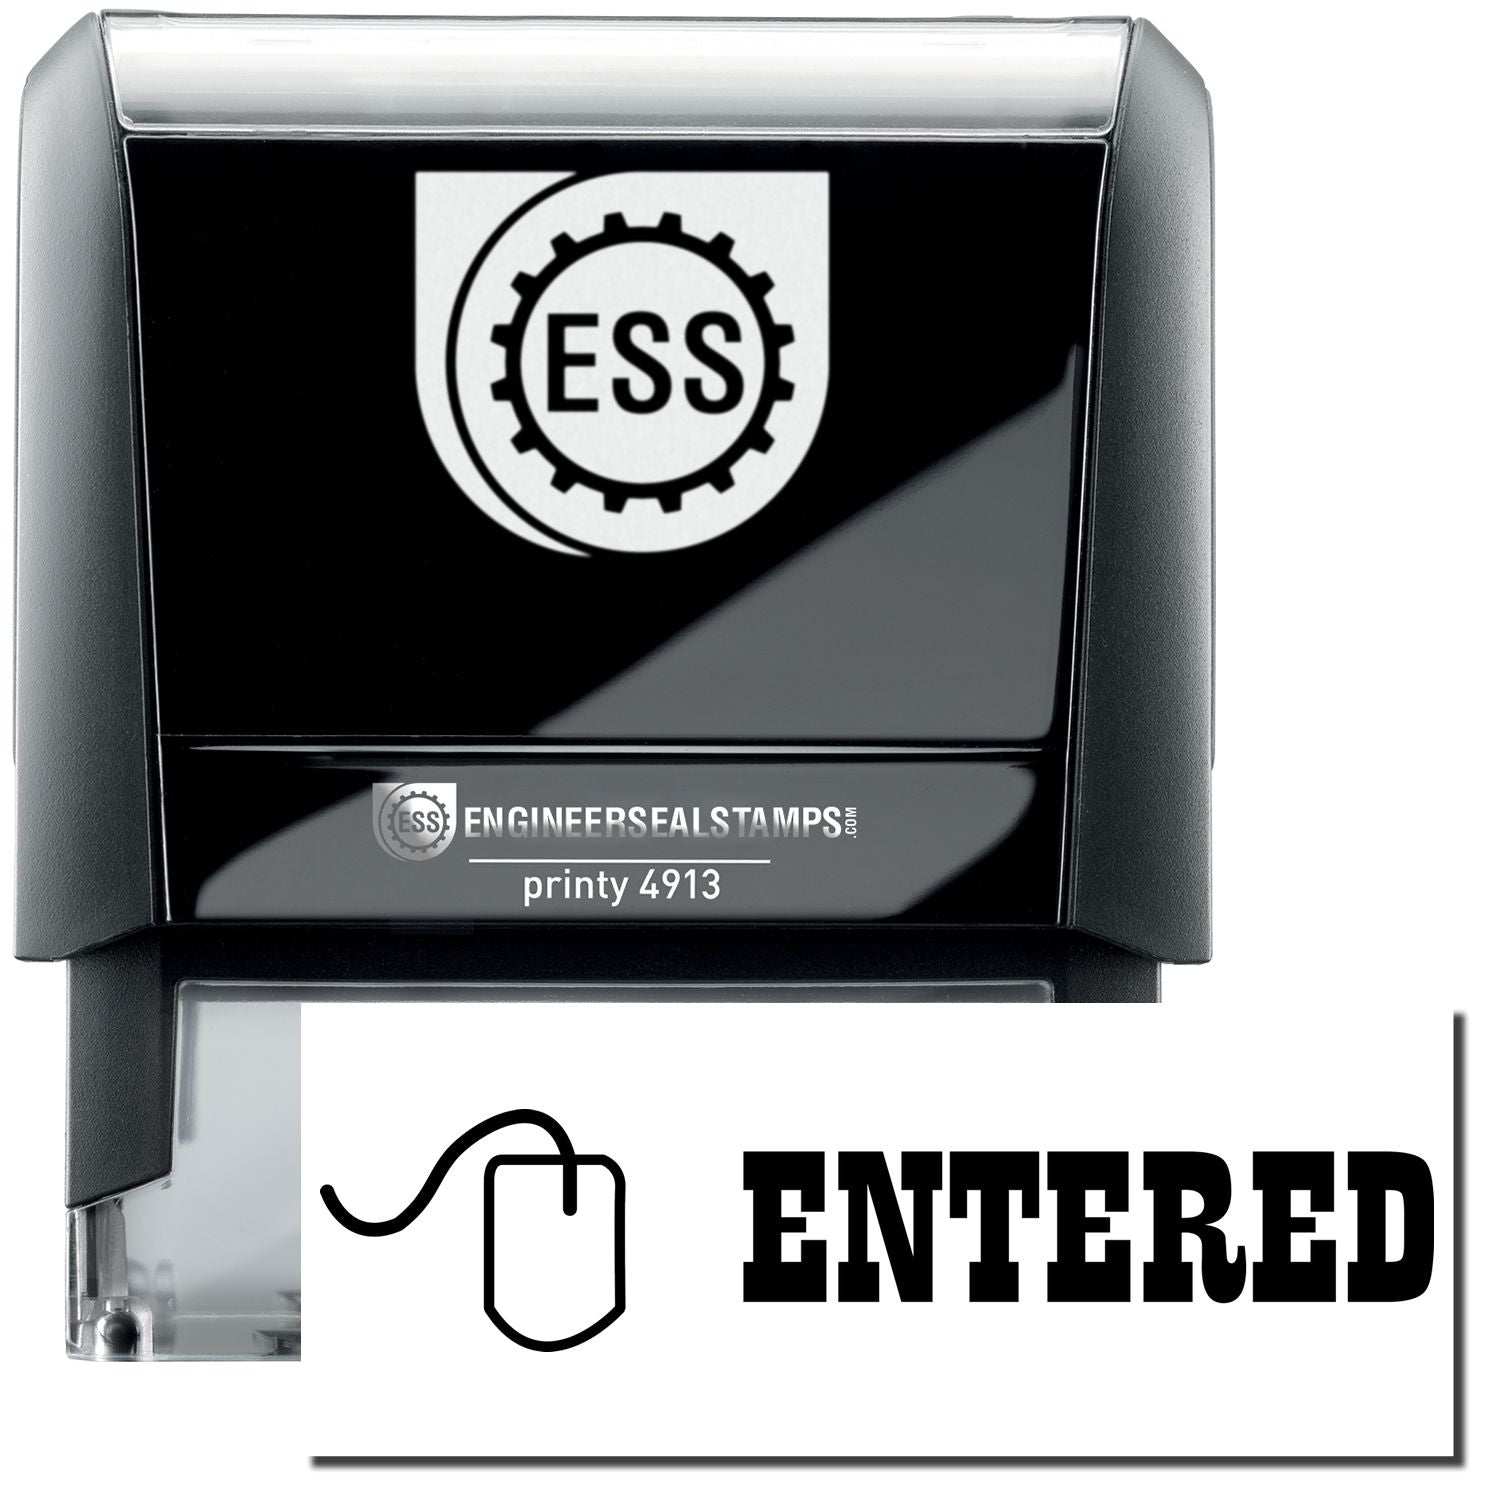 A self-inking stamp with a stamped image showing how the text "ENTERED" in a large bold font with a small icon of a mouse on the left side is displayed after stamping.